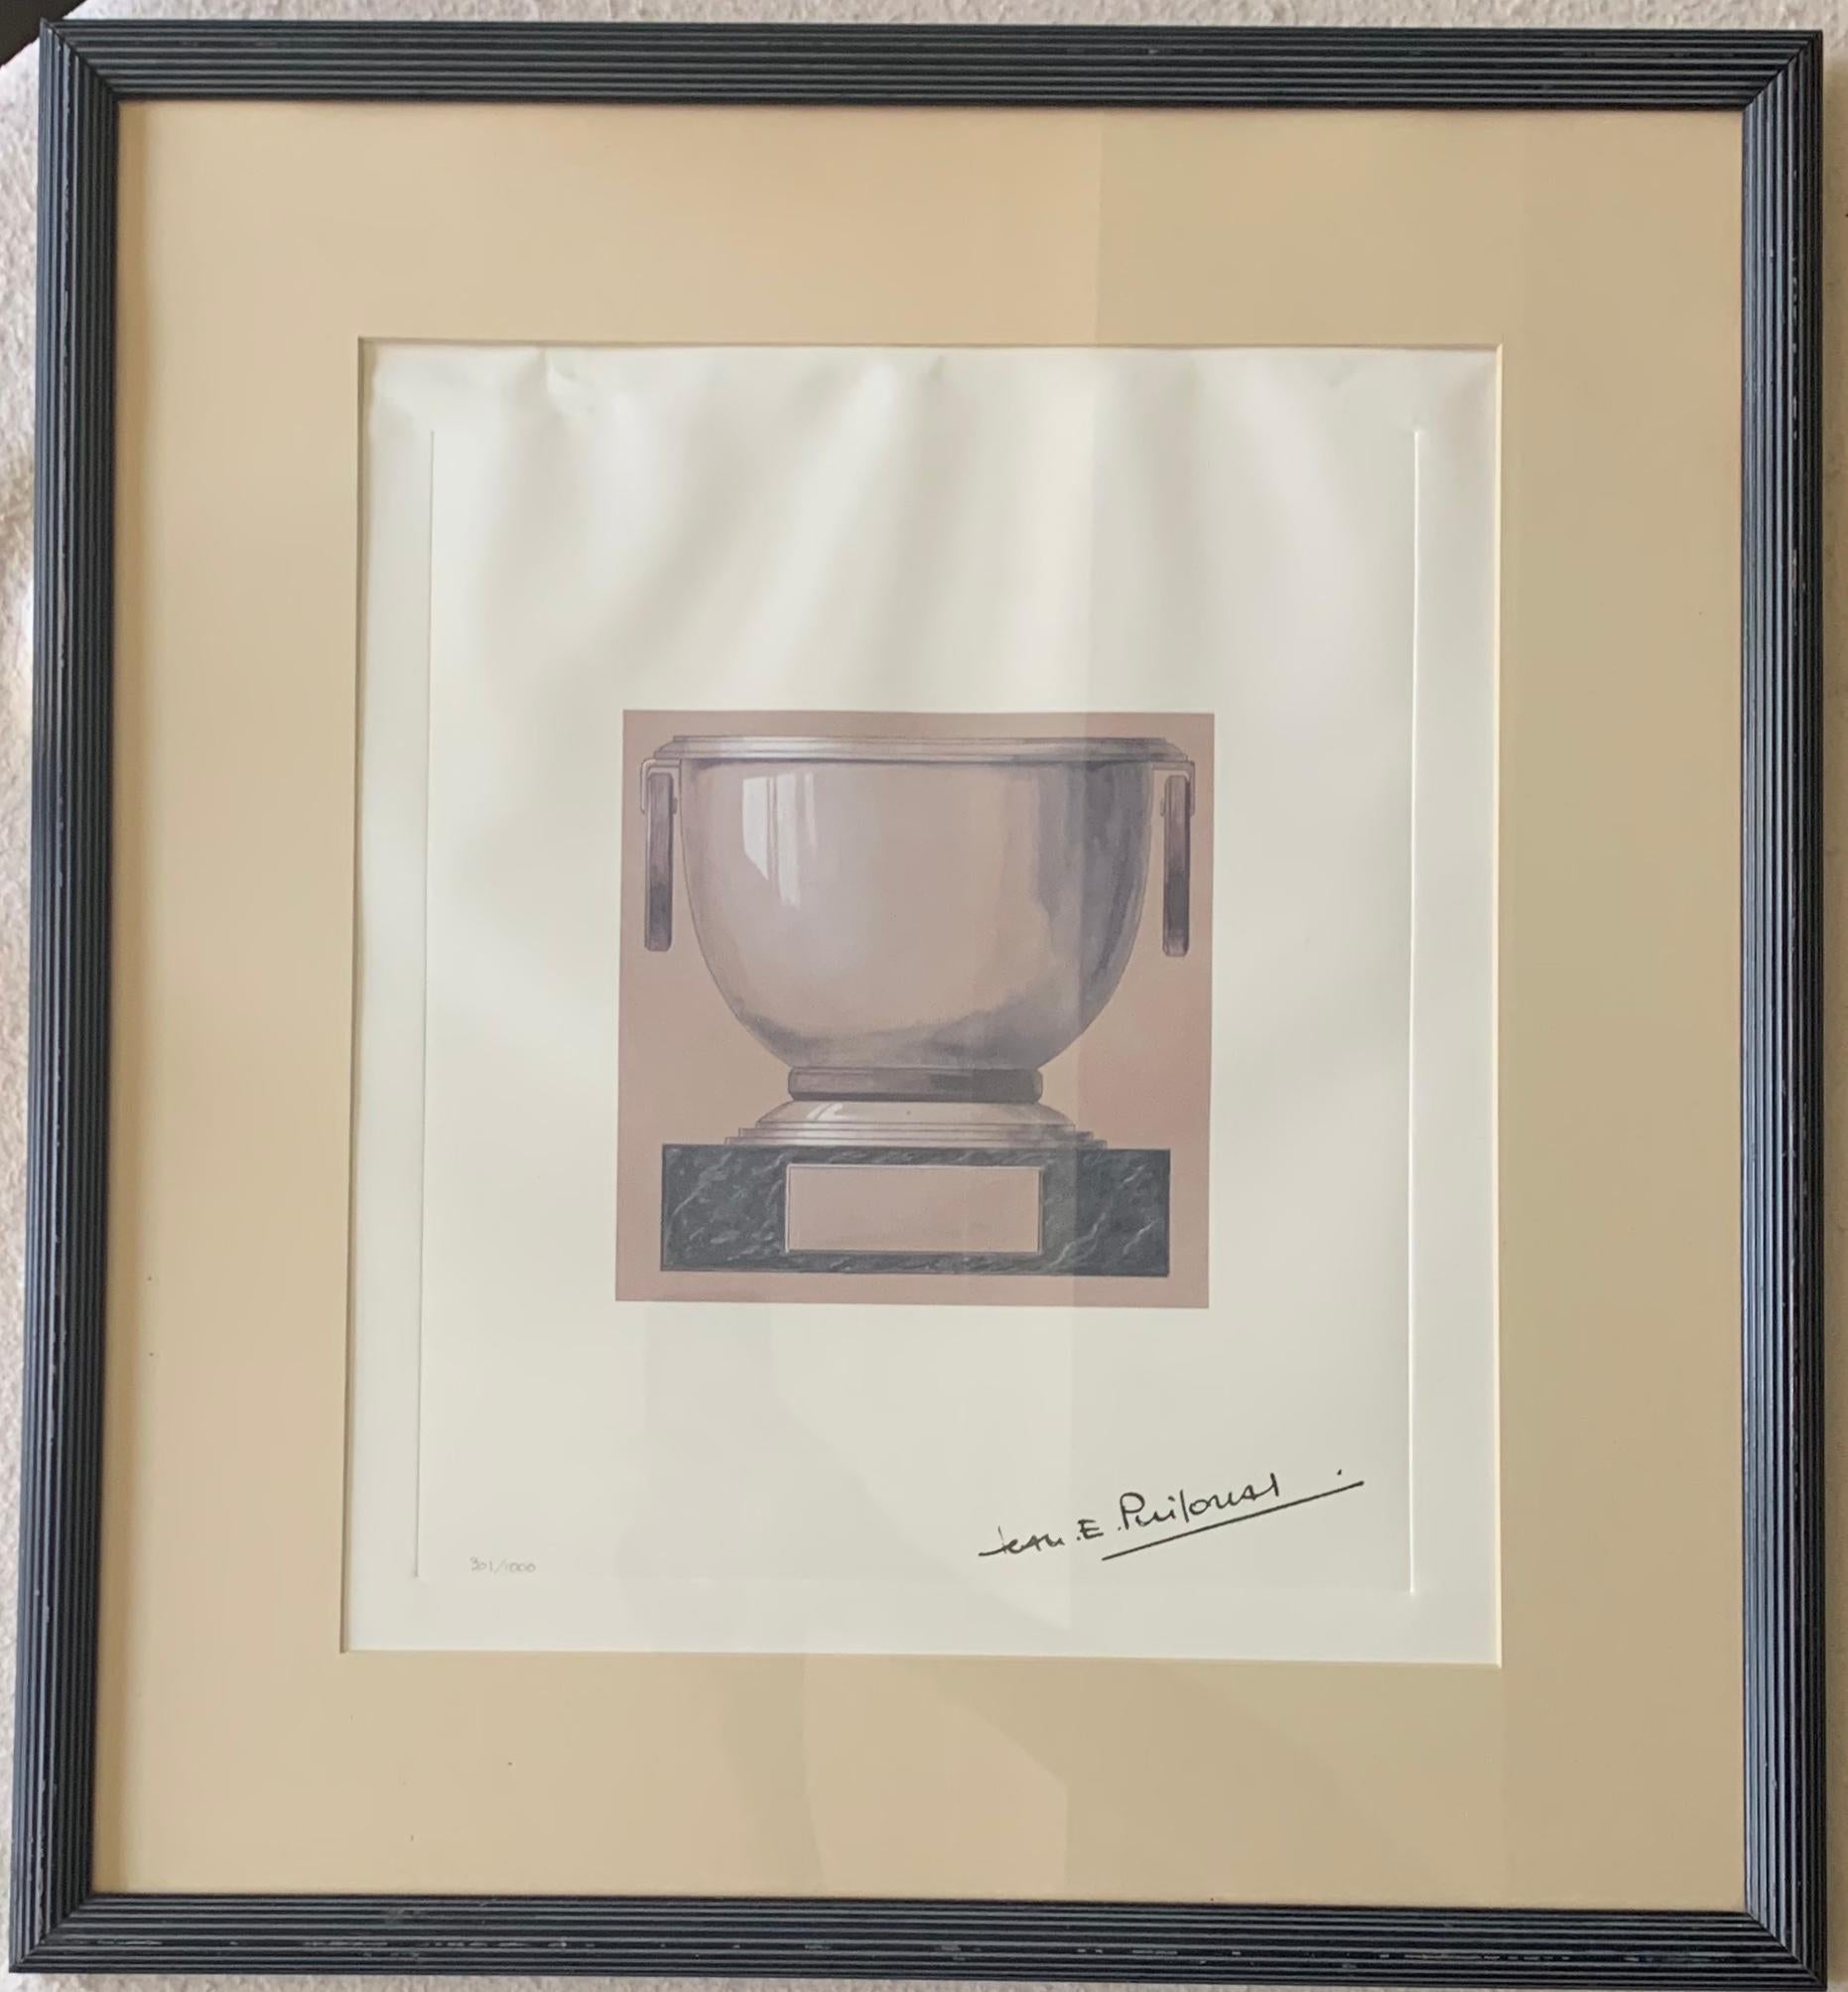 Framed litograph Jean E. Puiforcat. Study for a trophy serigraph in multiple colors on white wove paper 301/1000. Hand-signed by artist, en recto lower right. Numbered in pencil en recto lower left, France, circa 1940's
Dimensions: 21.5